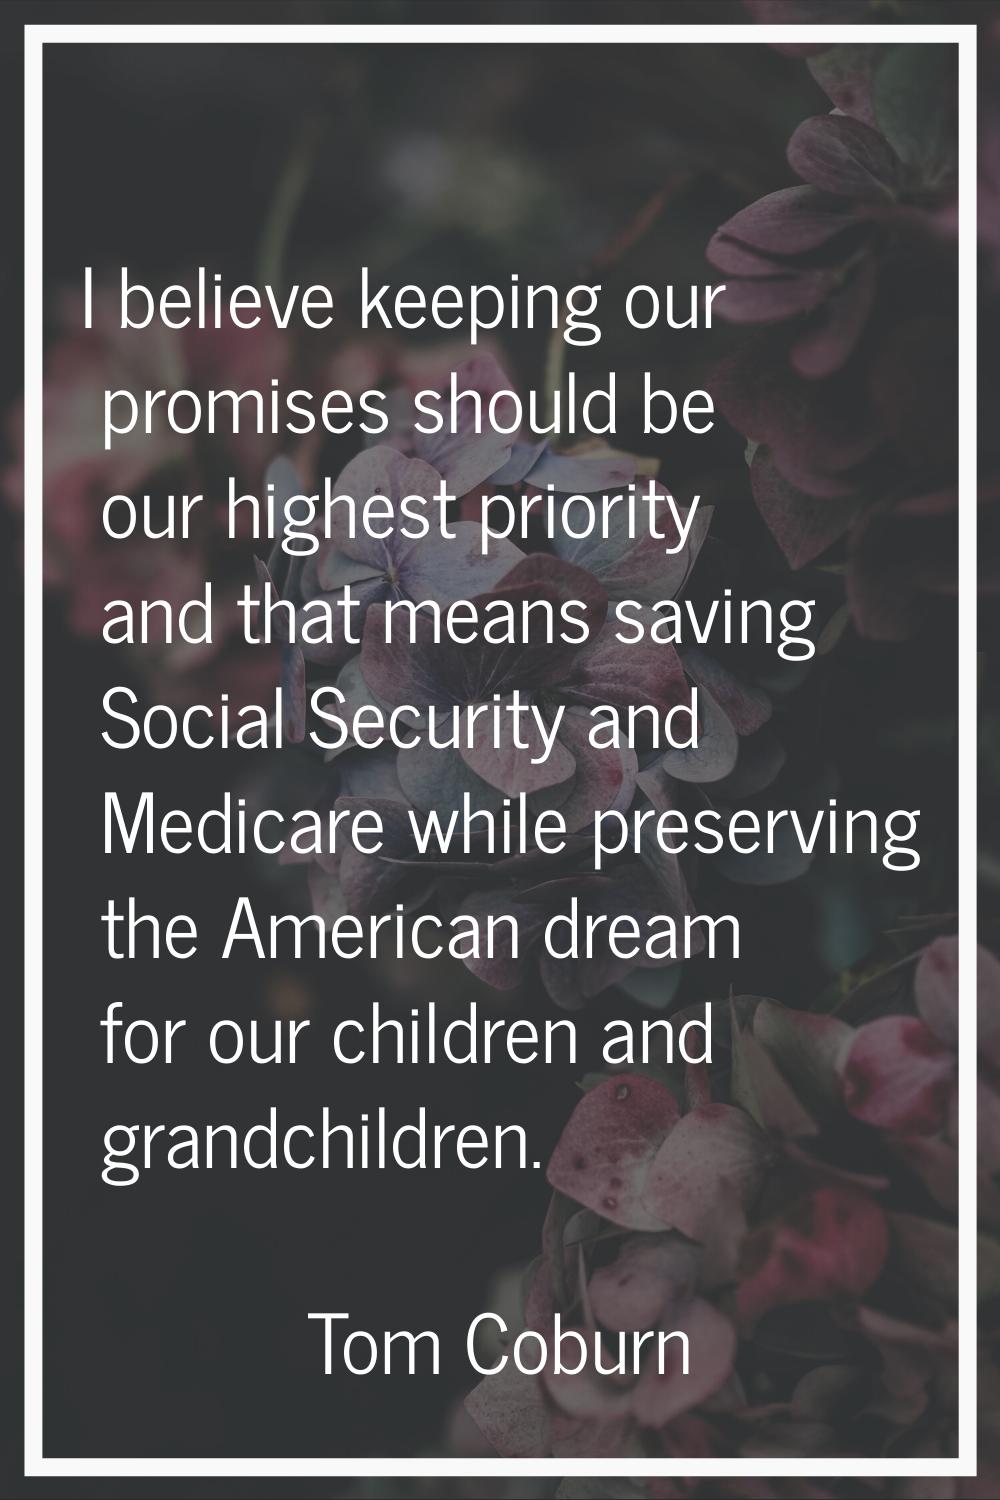 I believe keeping our promises should be our highest priority and that means saving Social Security